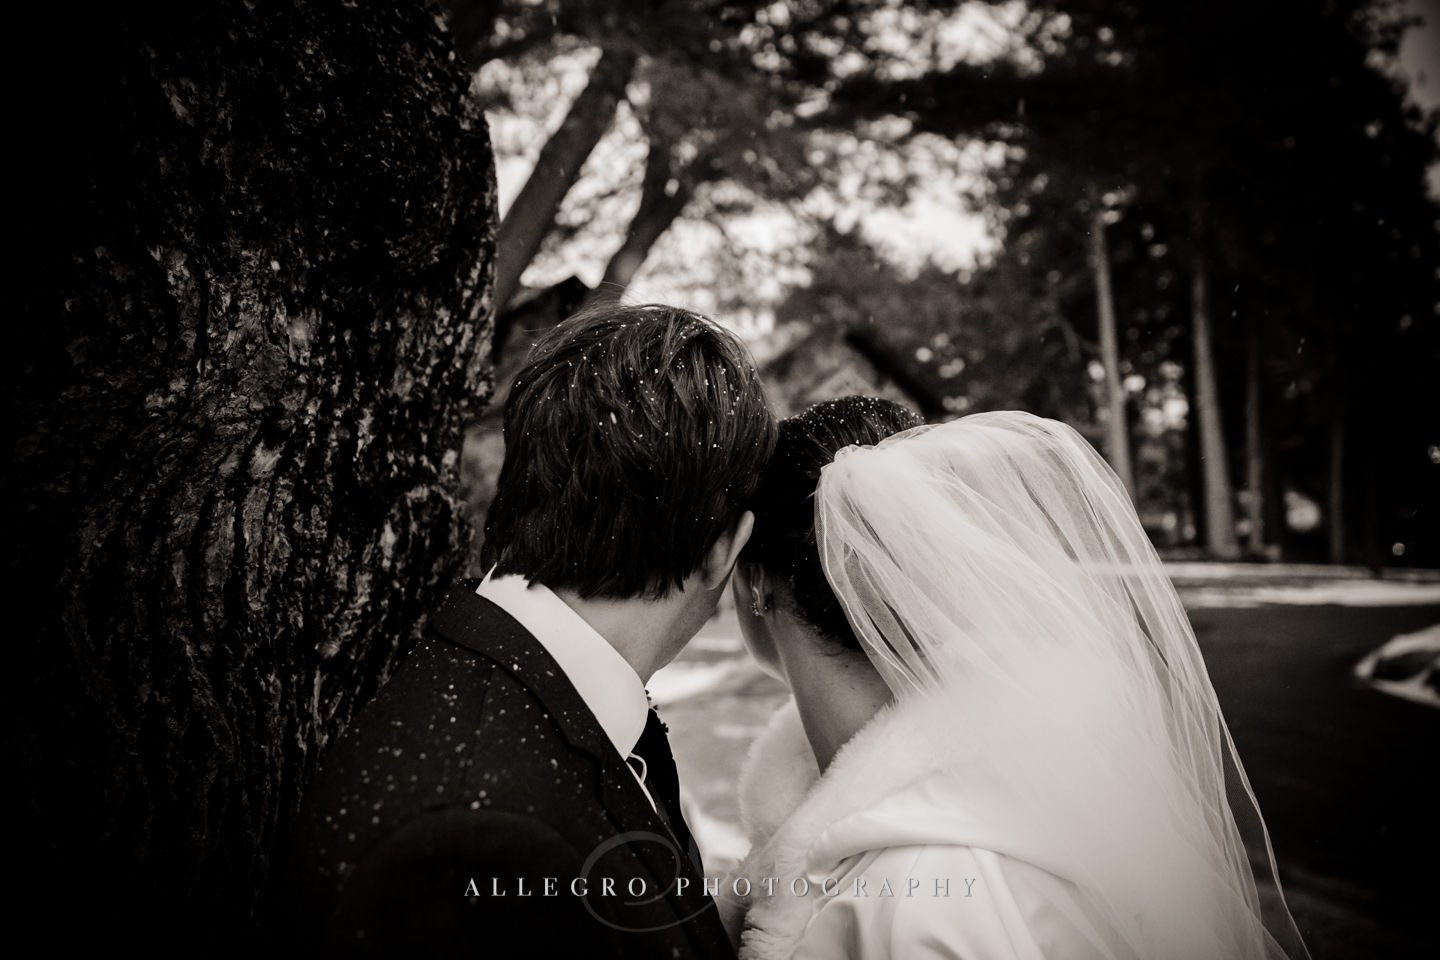 snowy bride and groom- photo by allegro photography